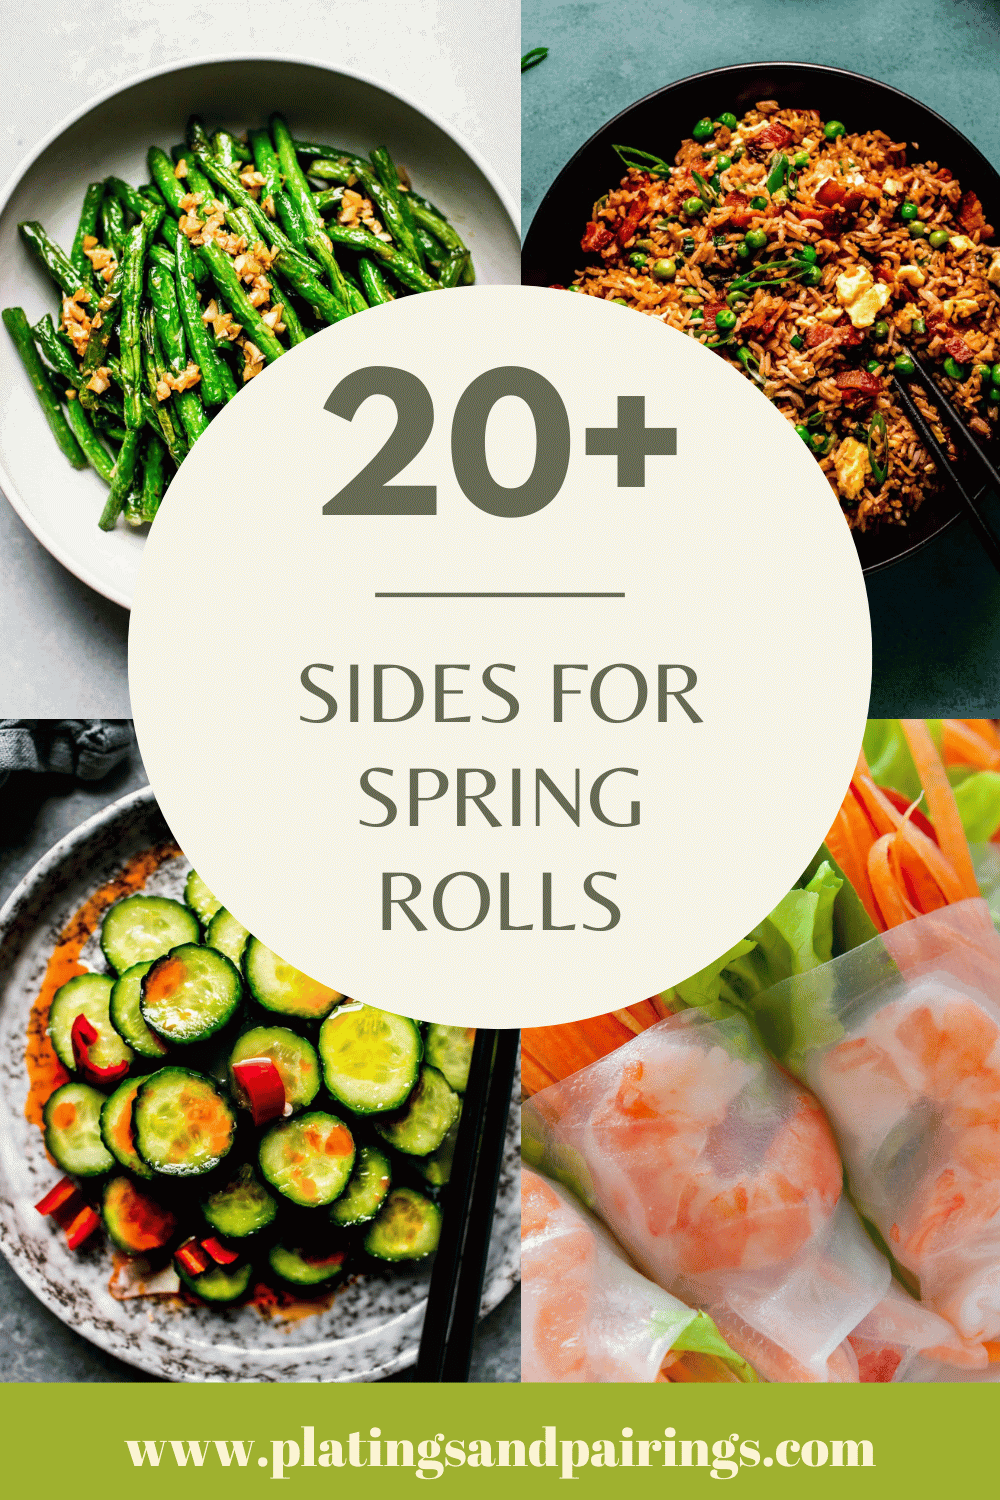 Collage of sides for spring rolls with text overlay.